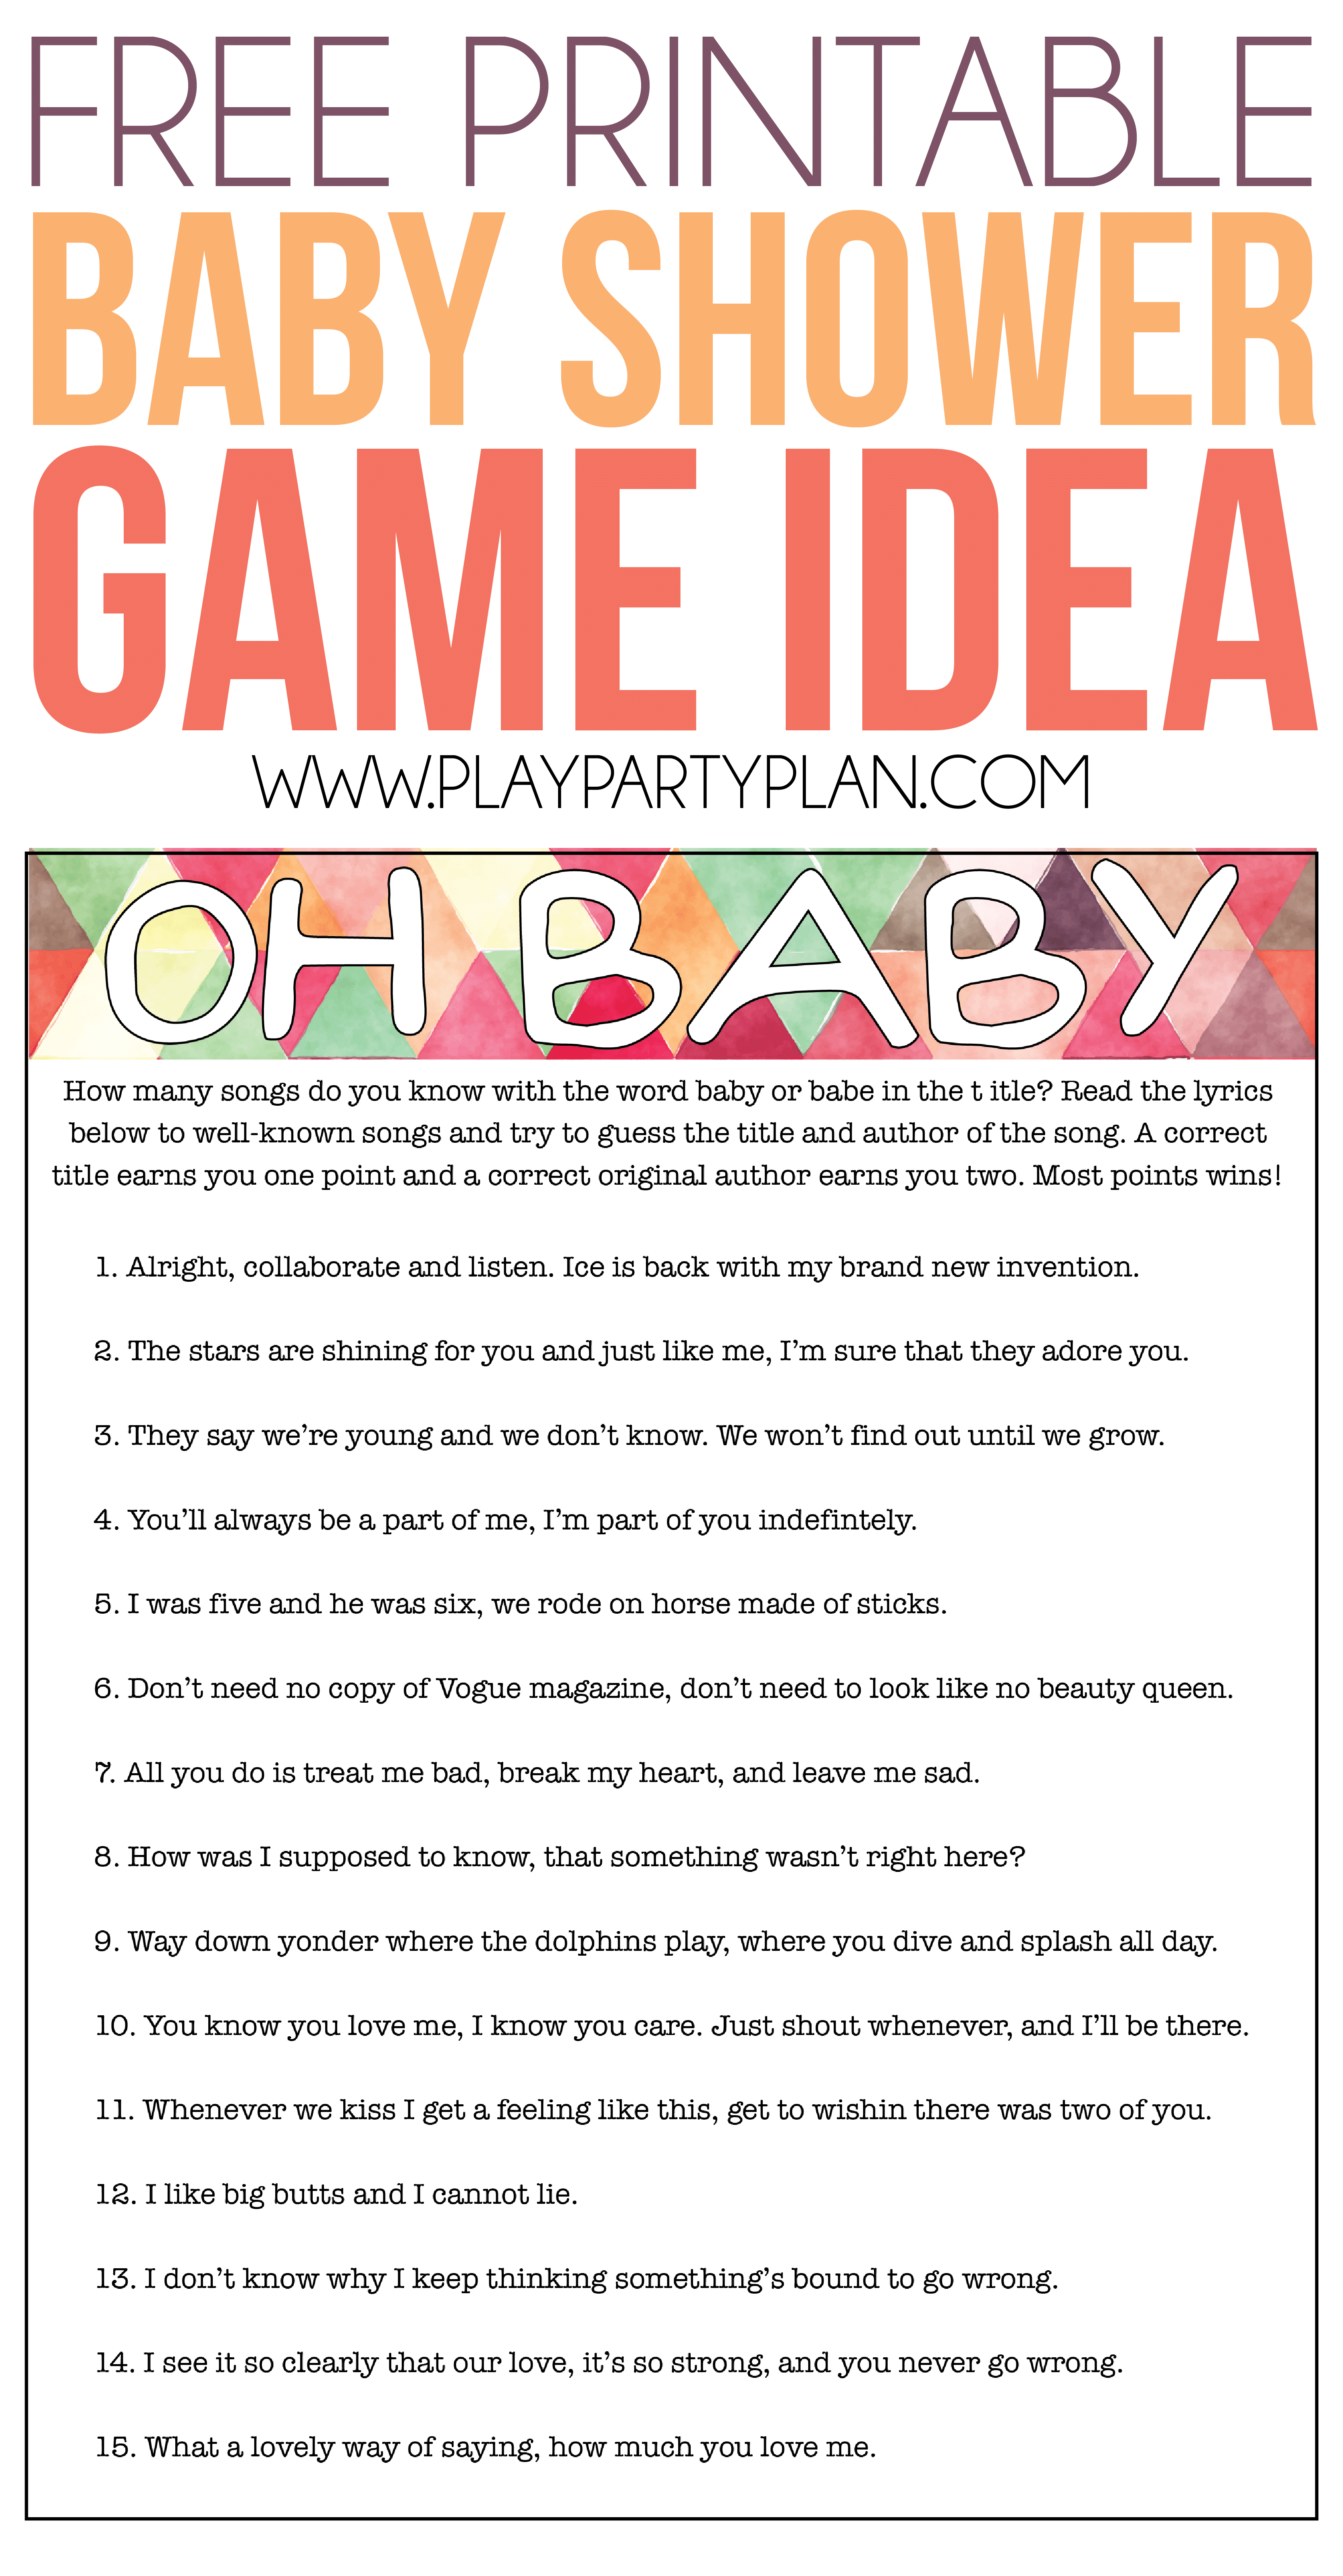 Free Printable Baby Shower Songs Guessing Game - Play Party Plan - Free Printable Baby Shower Games With Answer Key